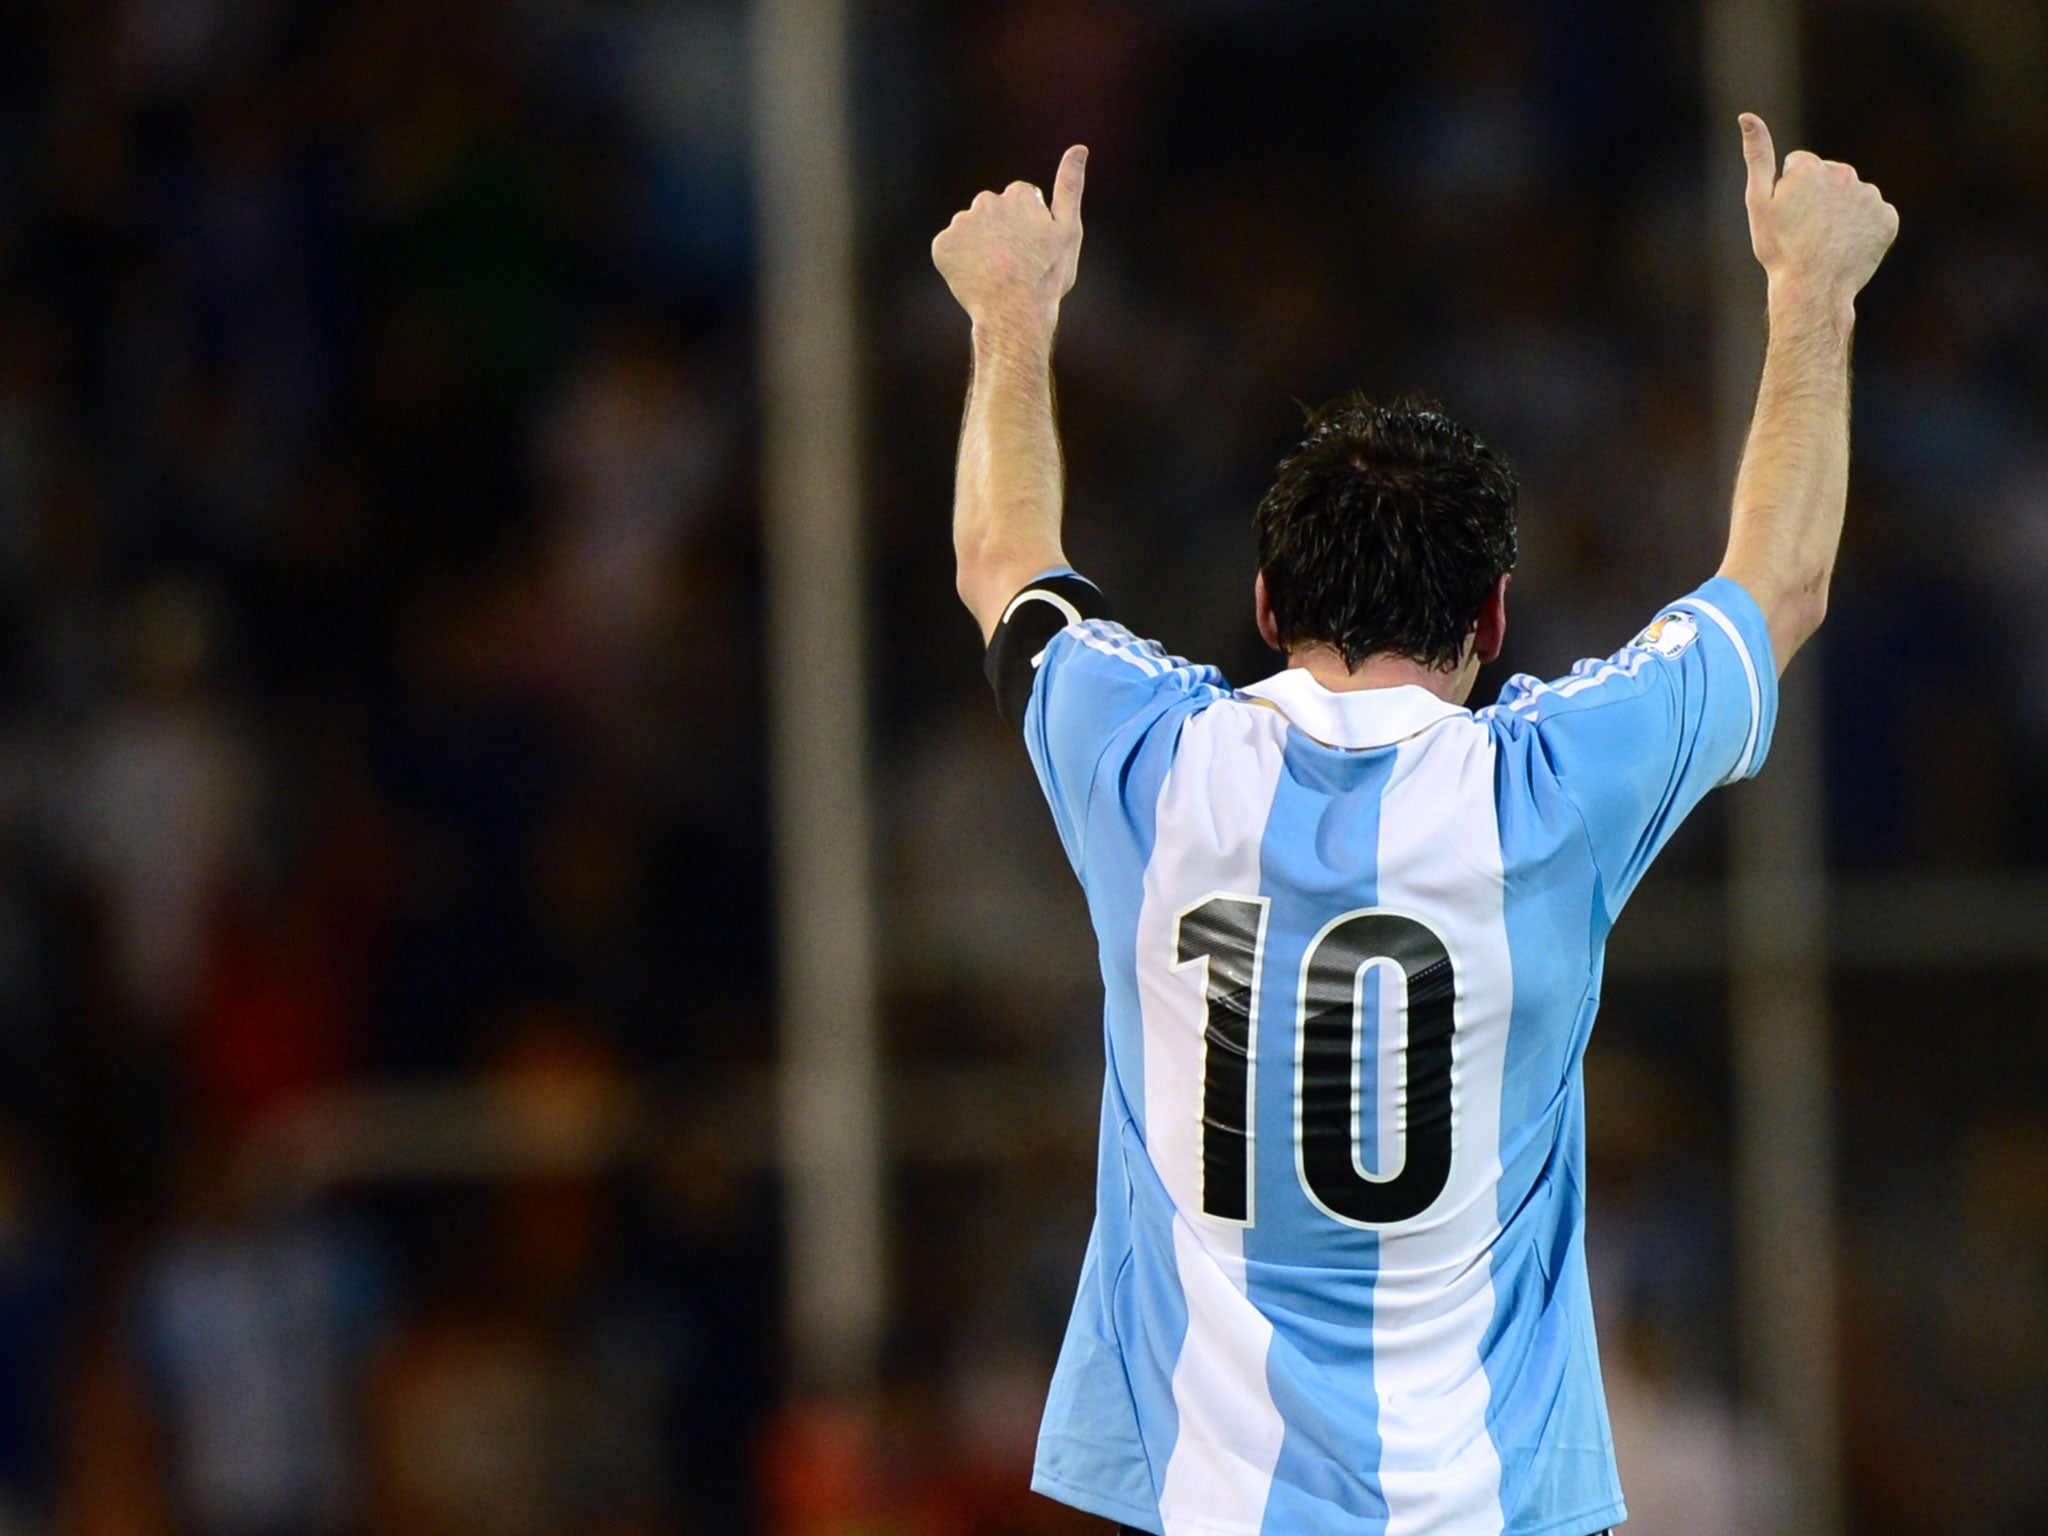 Argentinian forward Lionel Messi celebrates after scoring a goal against Uruguay during a FIFA World Cup Brazil 2014 qualifier match on October 12, 2012.